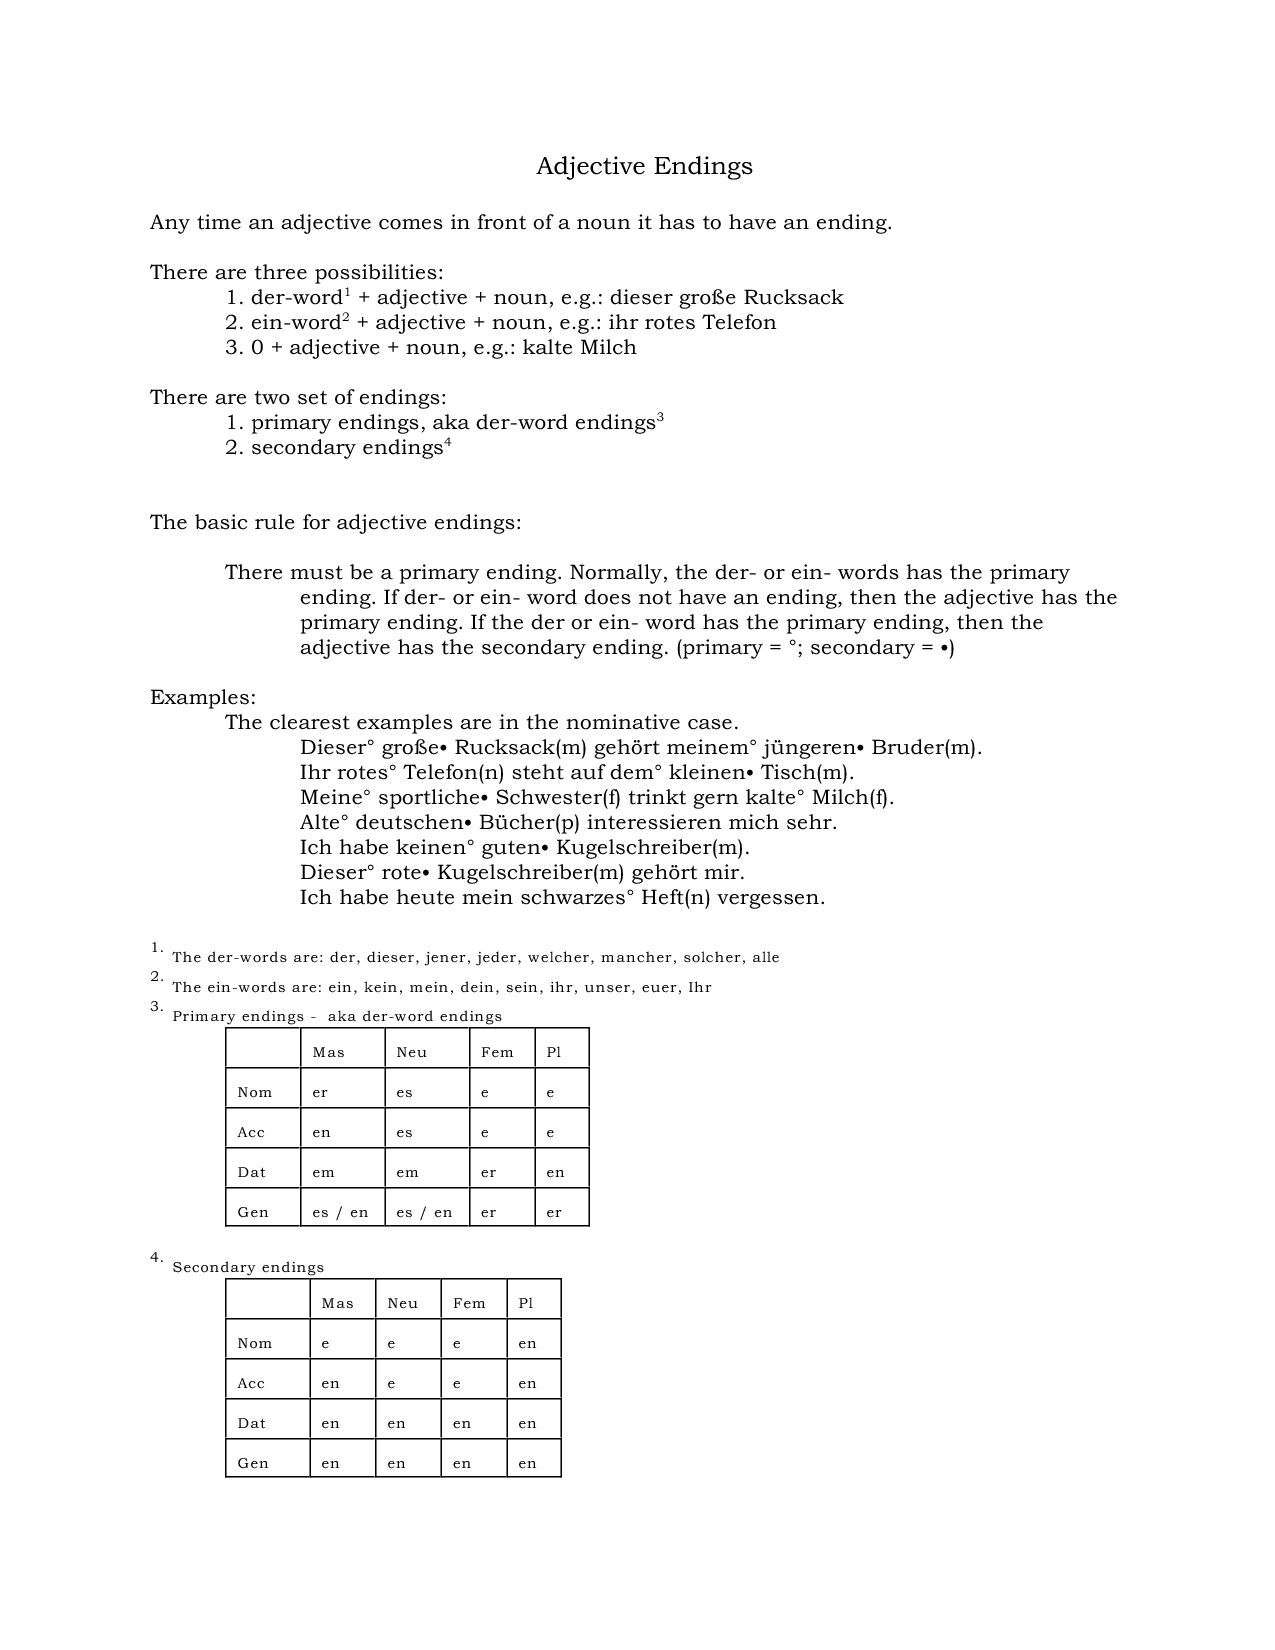 16-best-images-of-subject-predicate-worksheets-simple-subject-and-predicate-worksheets